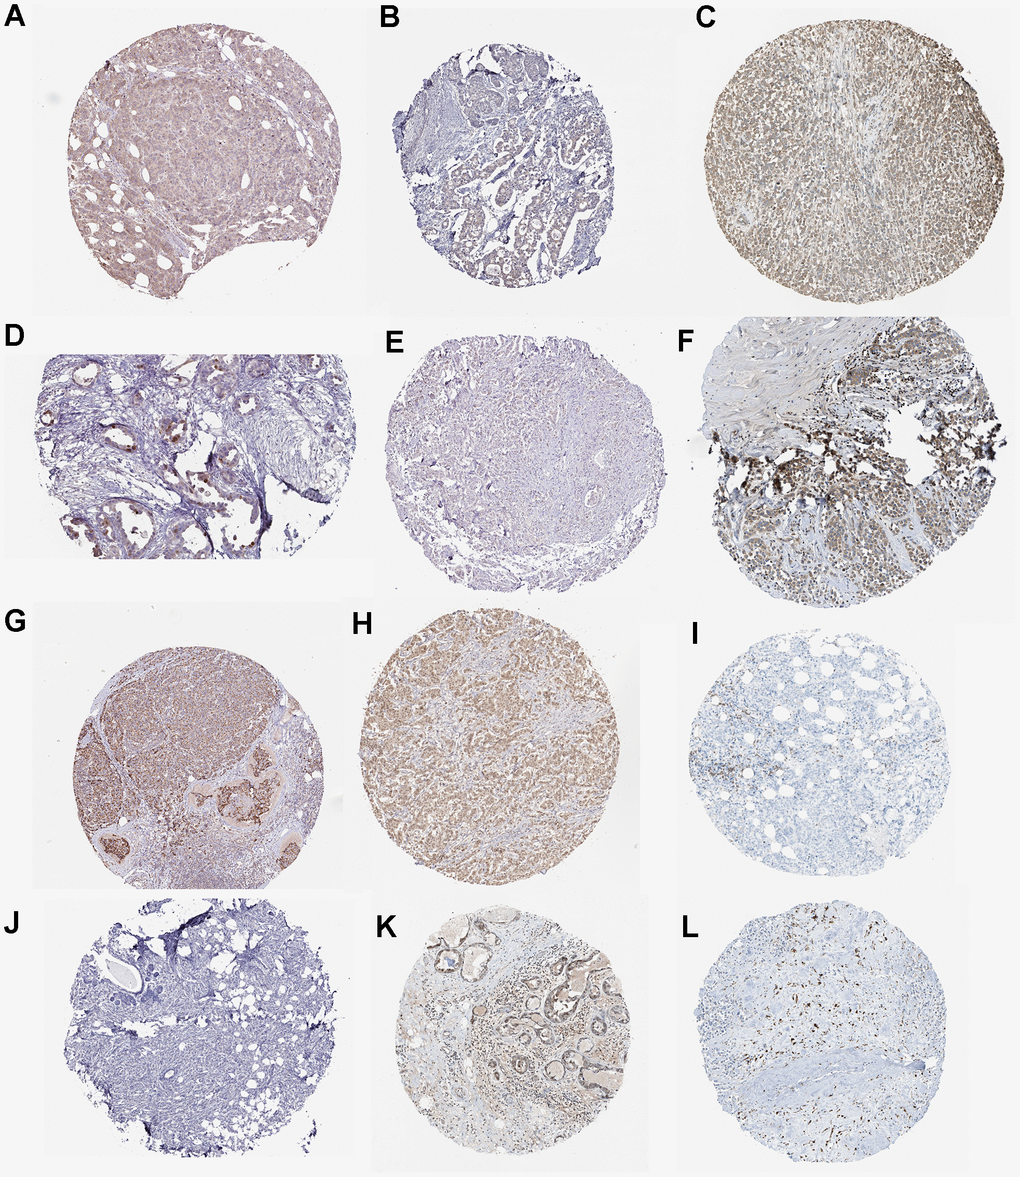 Immunohistochemistry for (A) DTX1 (https://www.proteinatlas.org/ENSG00000135144-DTX1/pathology/breast+cancer#imid